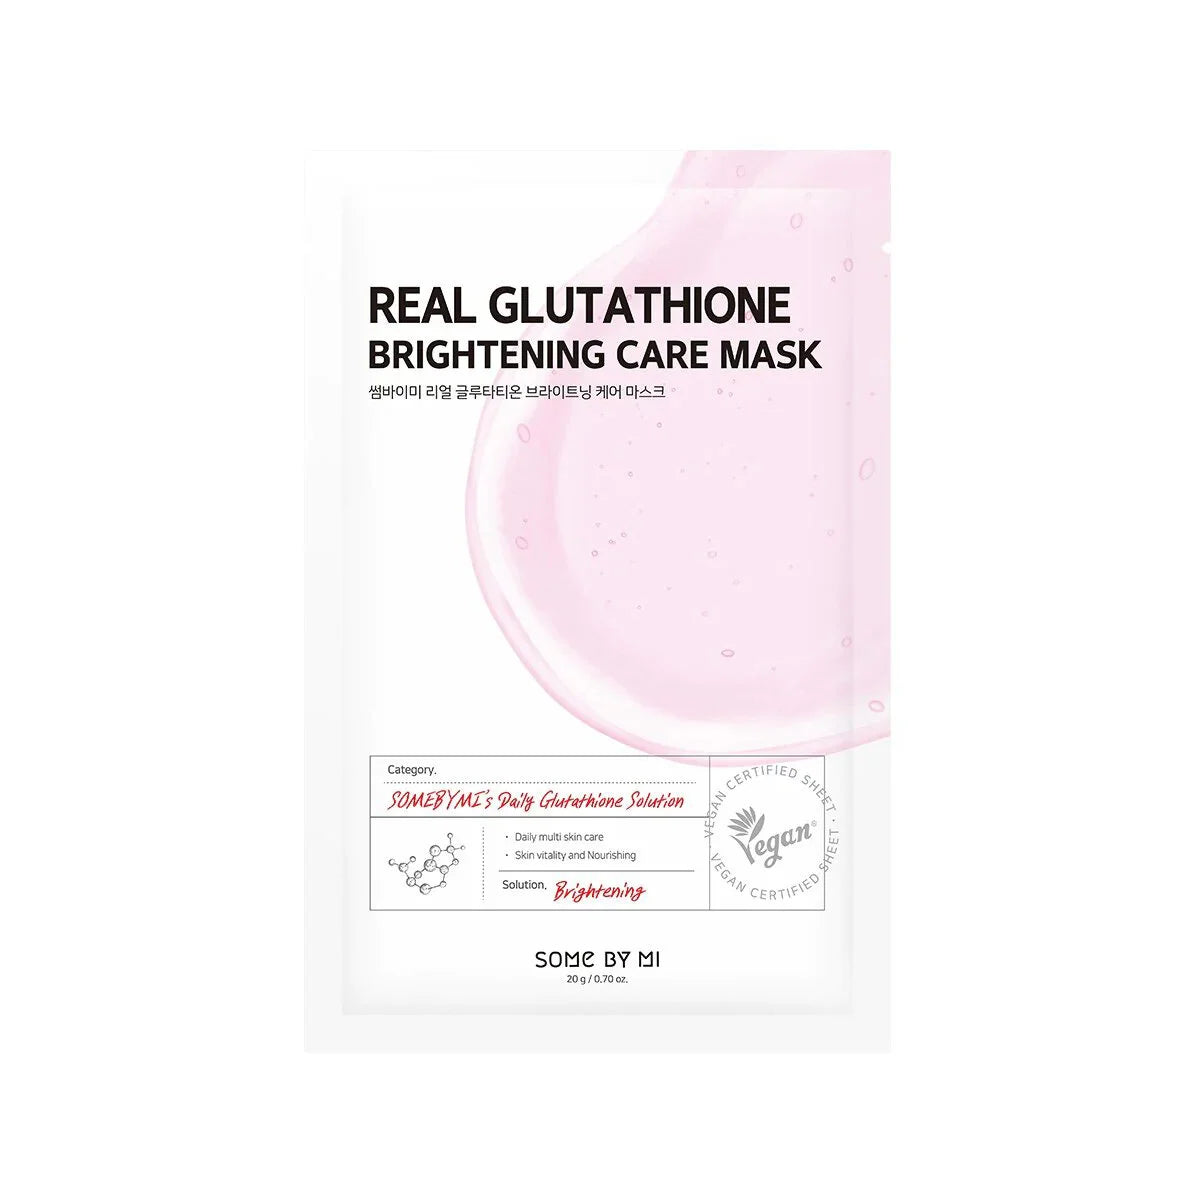 Some By Mi Real Glutathione Brightening Care Mask best Korean sheet mask for dark spots pigmentation uneven skin tone dull dry skin care K Beauty World